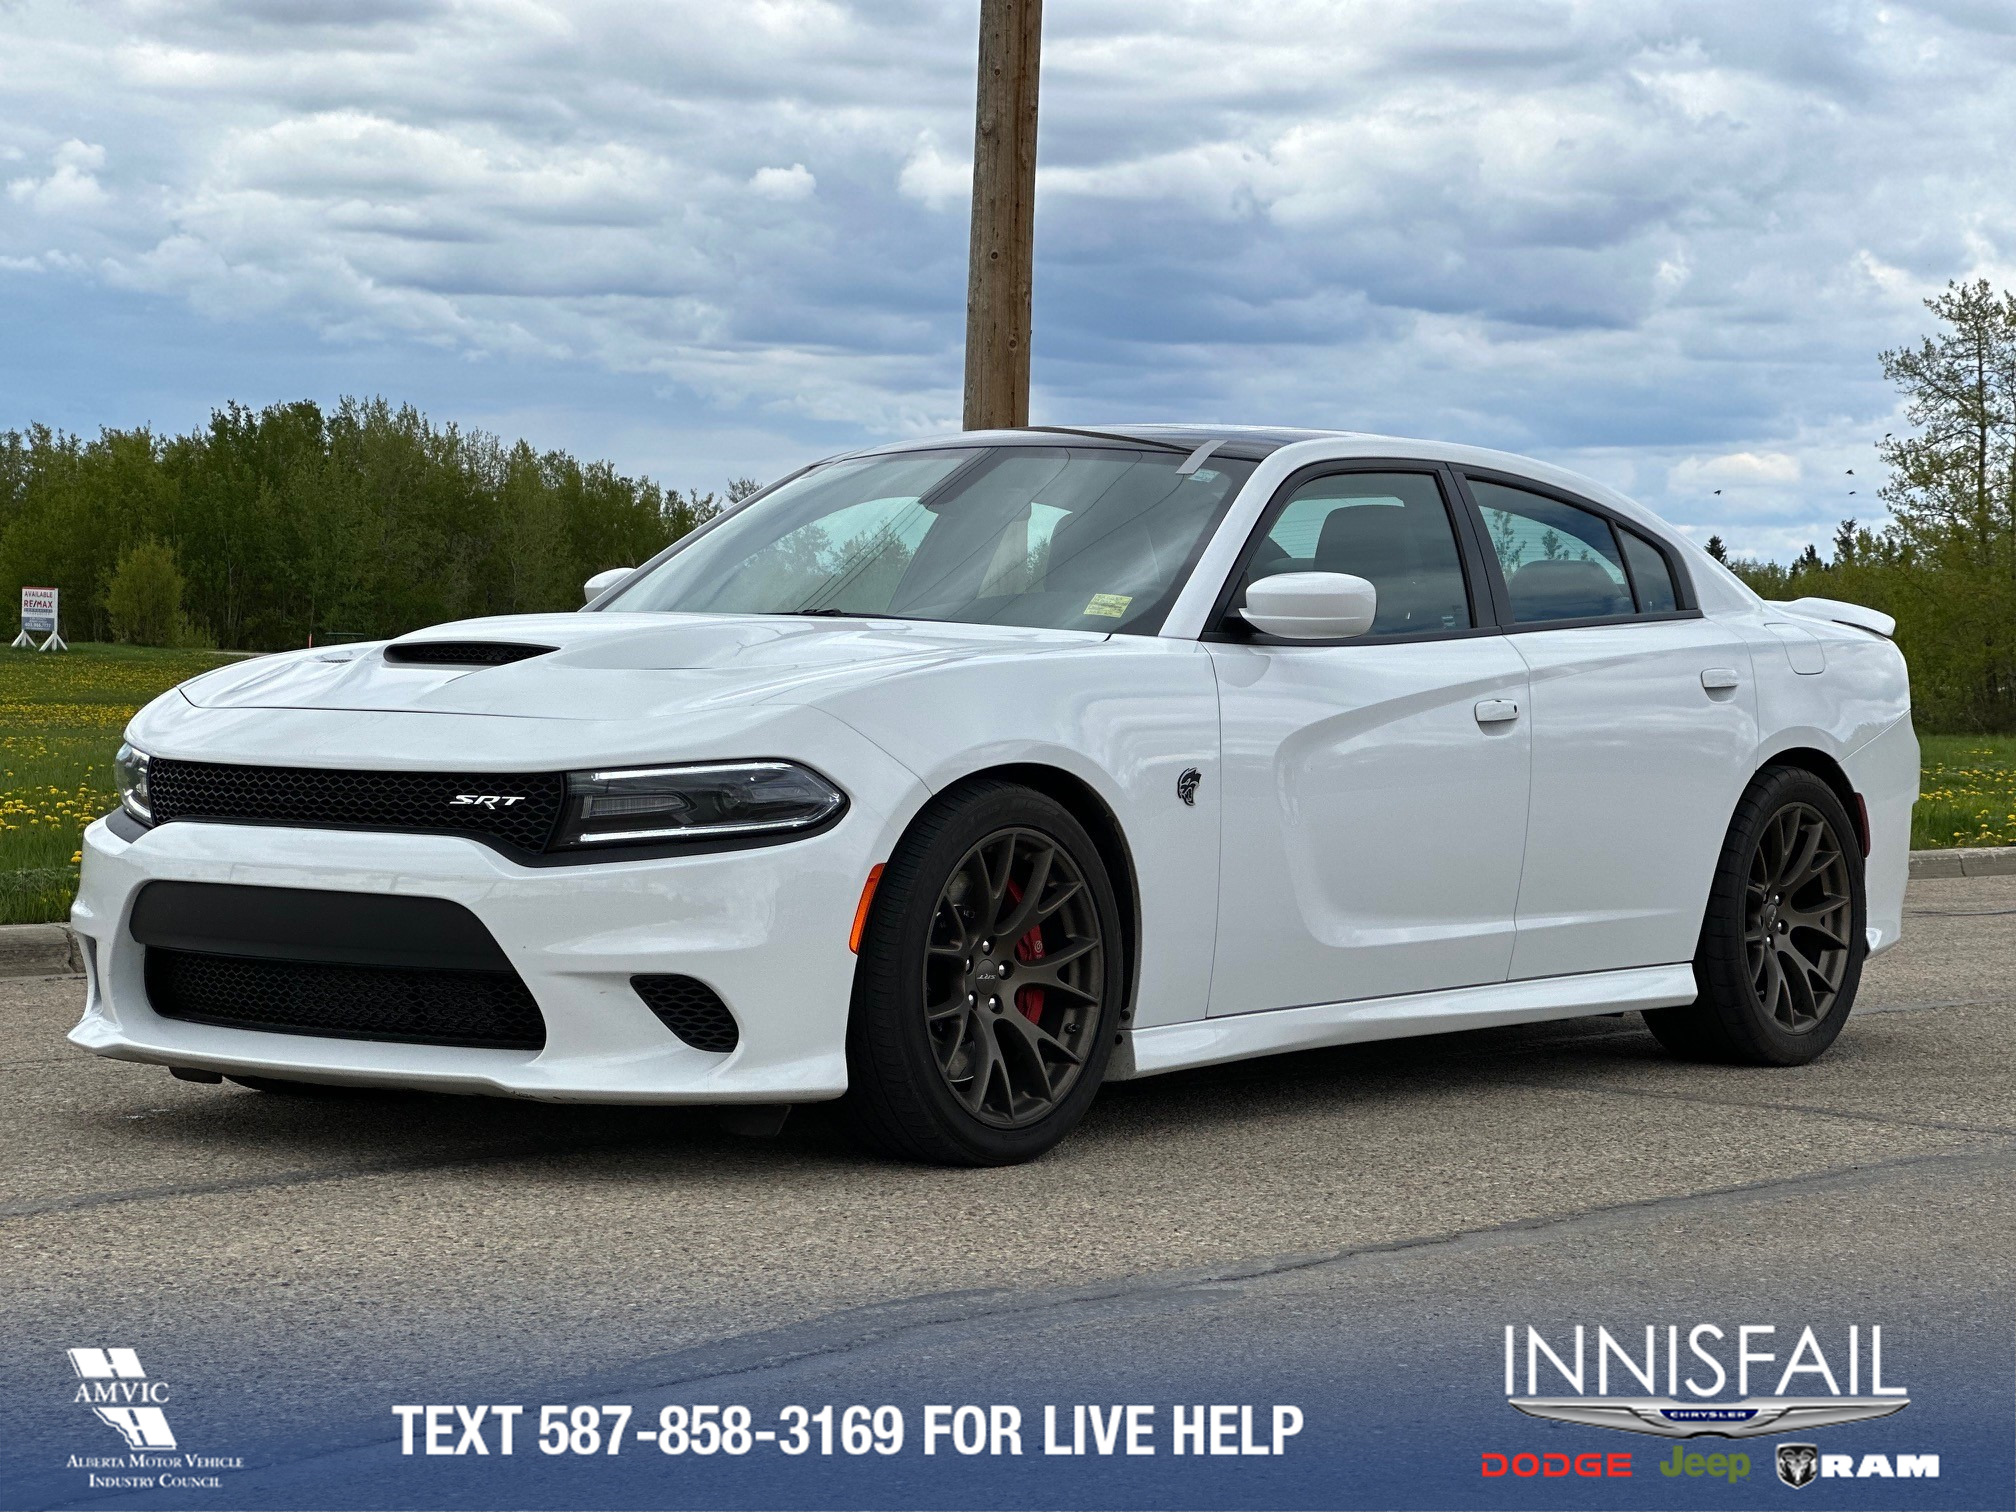 2017 Dodge Charger SRT Hellcat 6.2 Litre Supercharged V8! Very Low KM